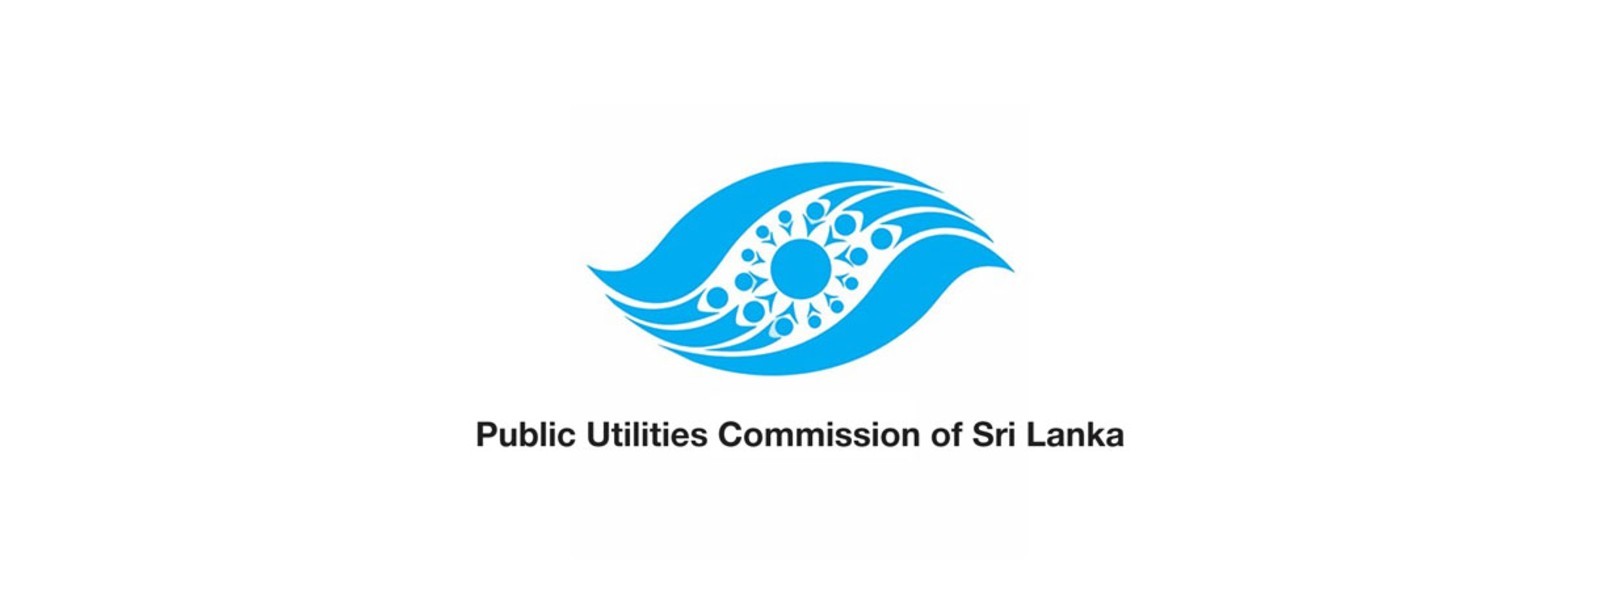 Lodge complaint if power cut lasts beyond stipulated time: PUCSL